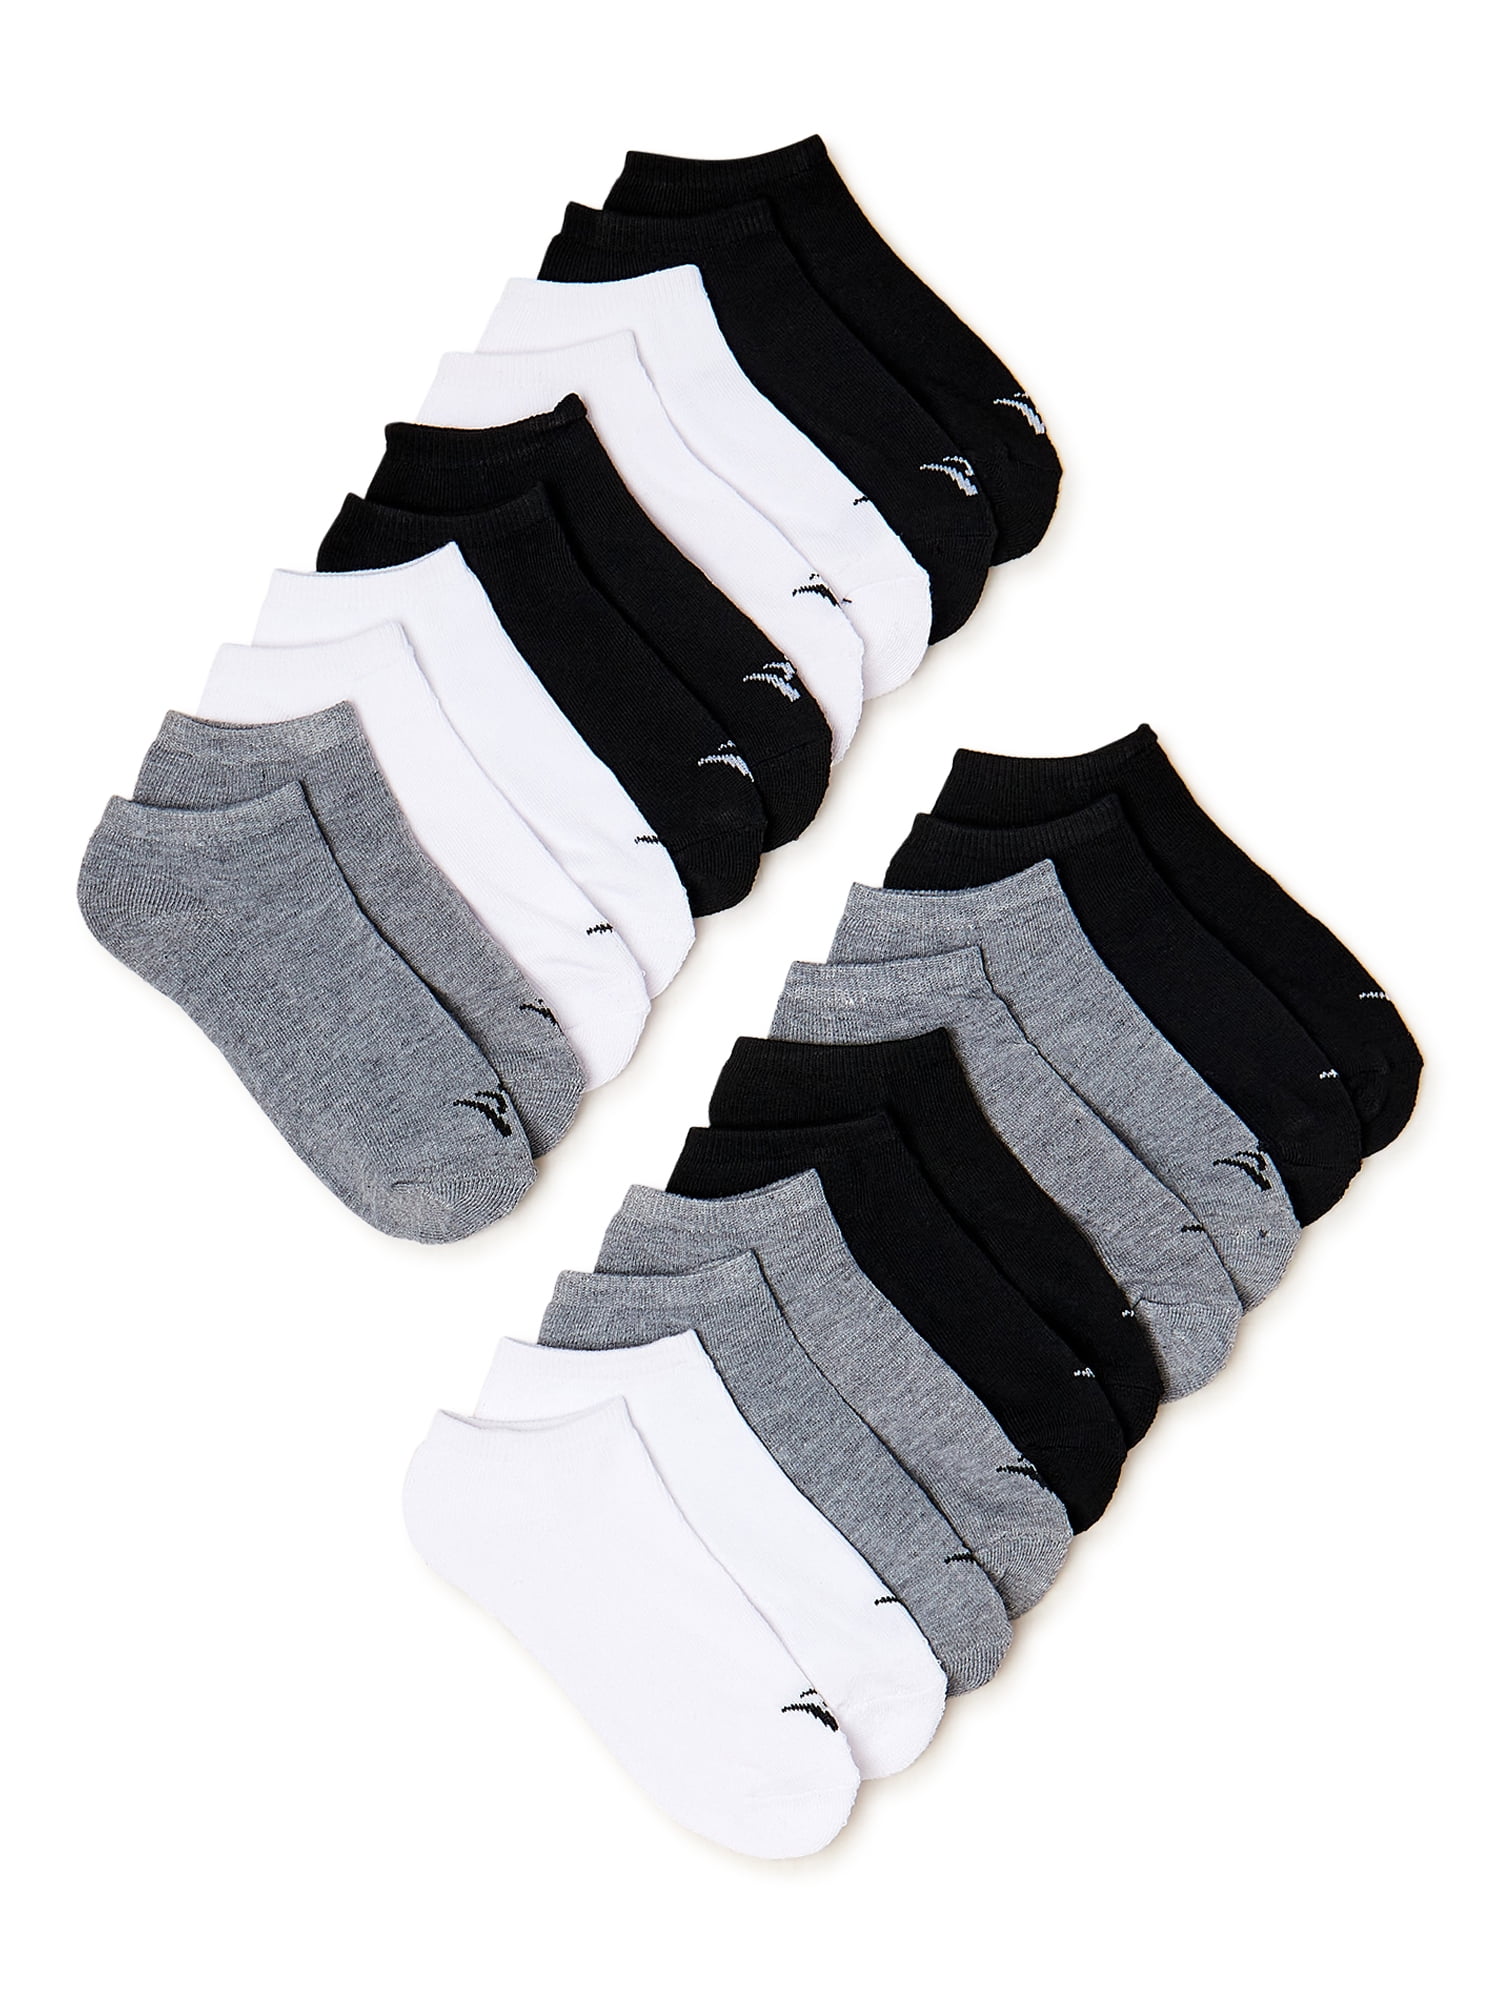 Boys no show socks 15 pairs sports patterns Choose your size 